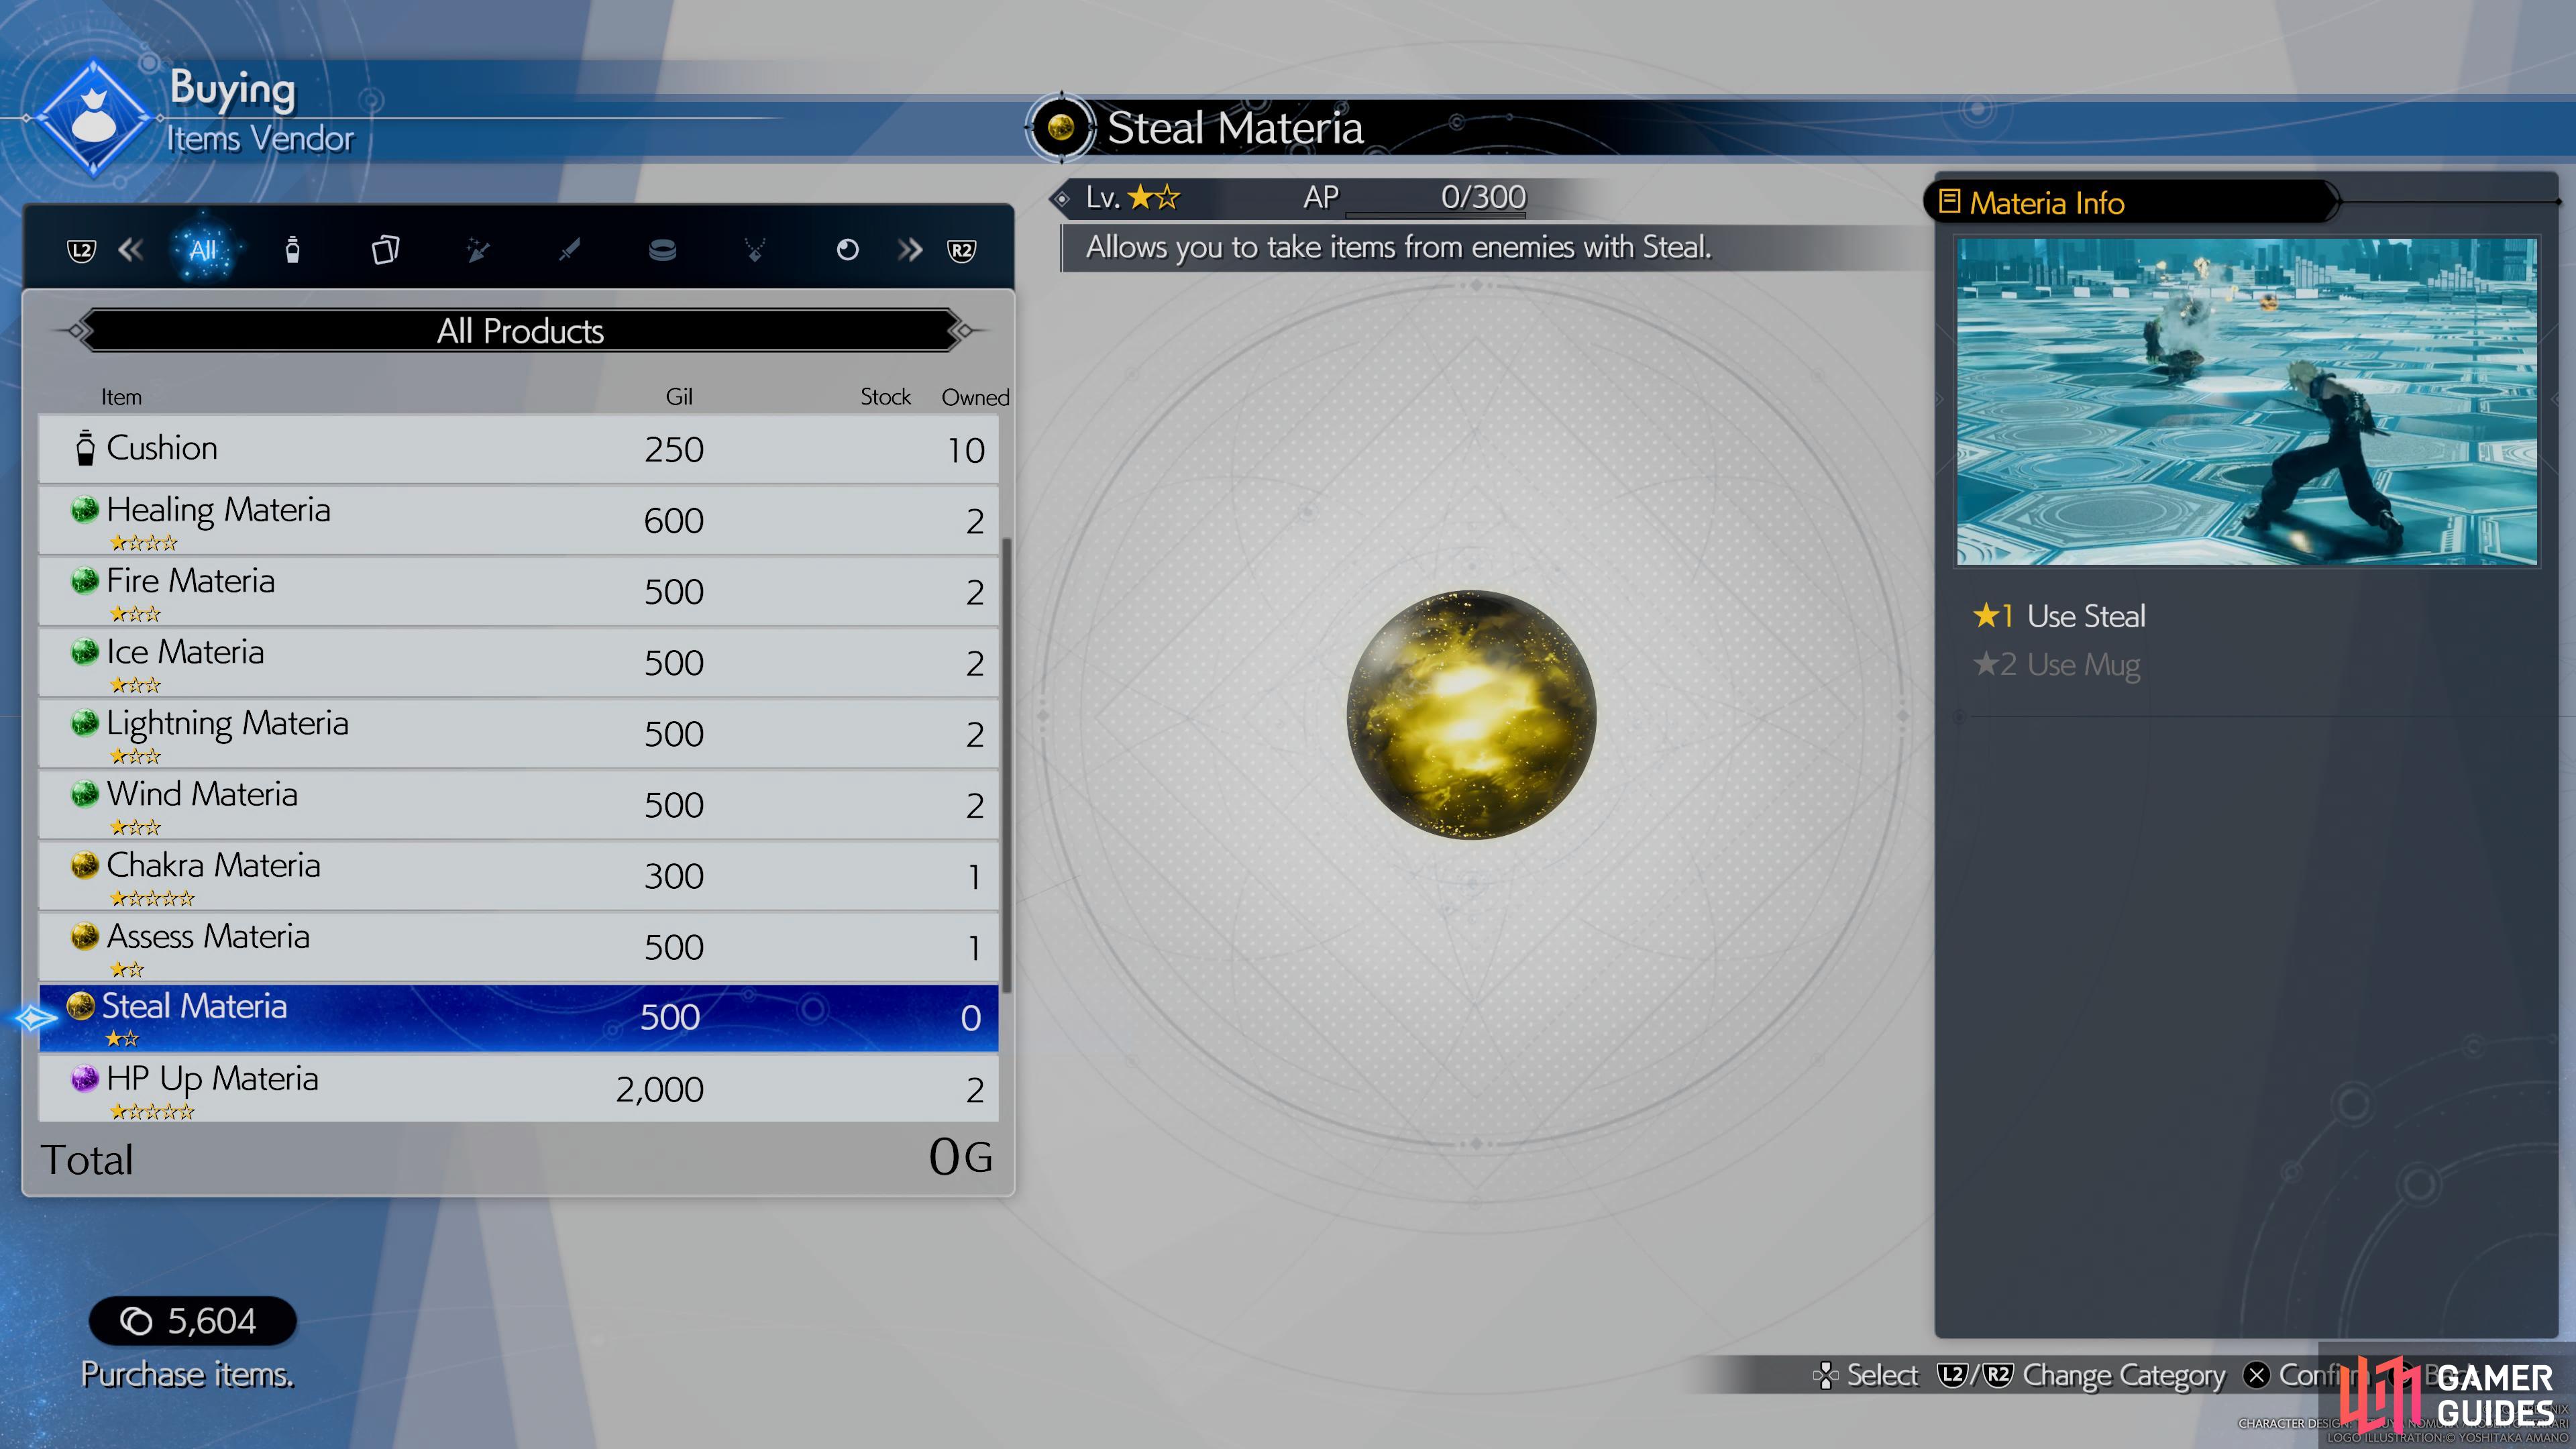 Steal Materia can be purchased from Item Vendors or Vending Machines.